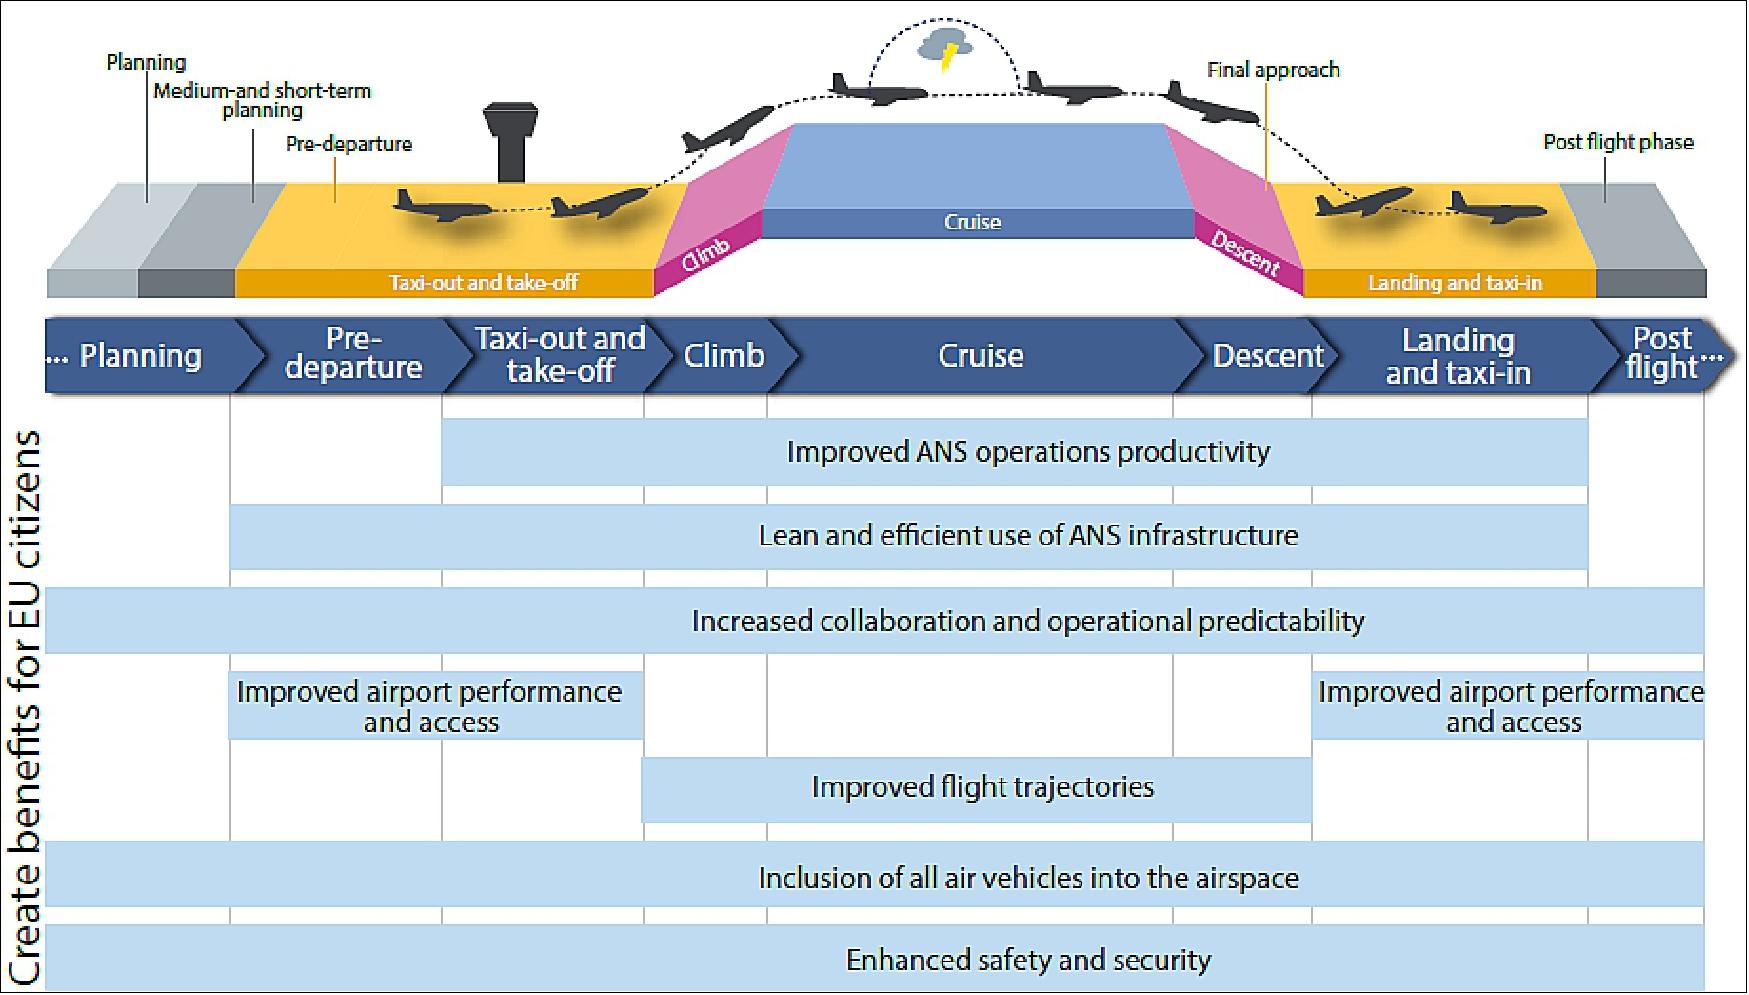 Figure 14: Improvements at every stage of the flight (image credit: EU, Eurocontrol, Ref. 24)